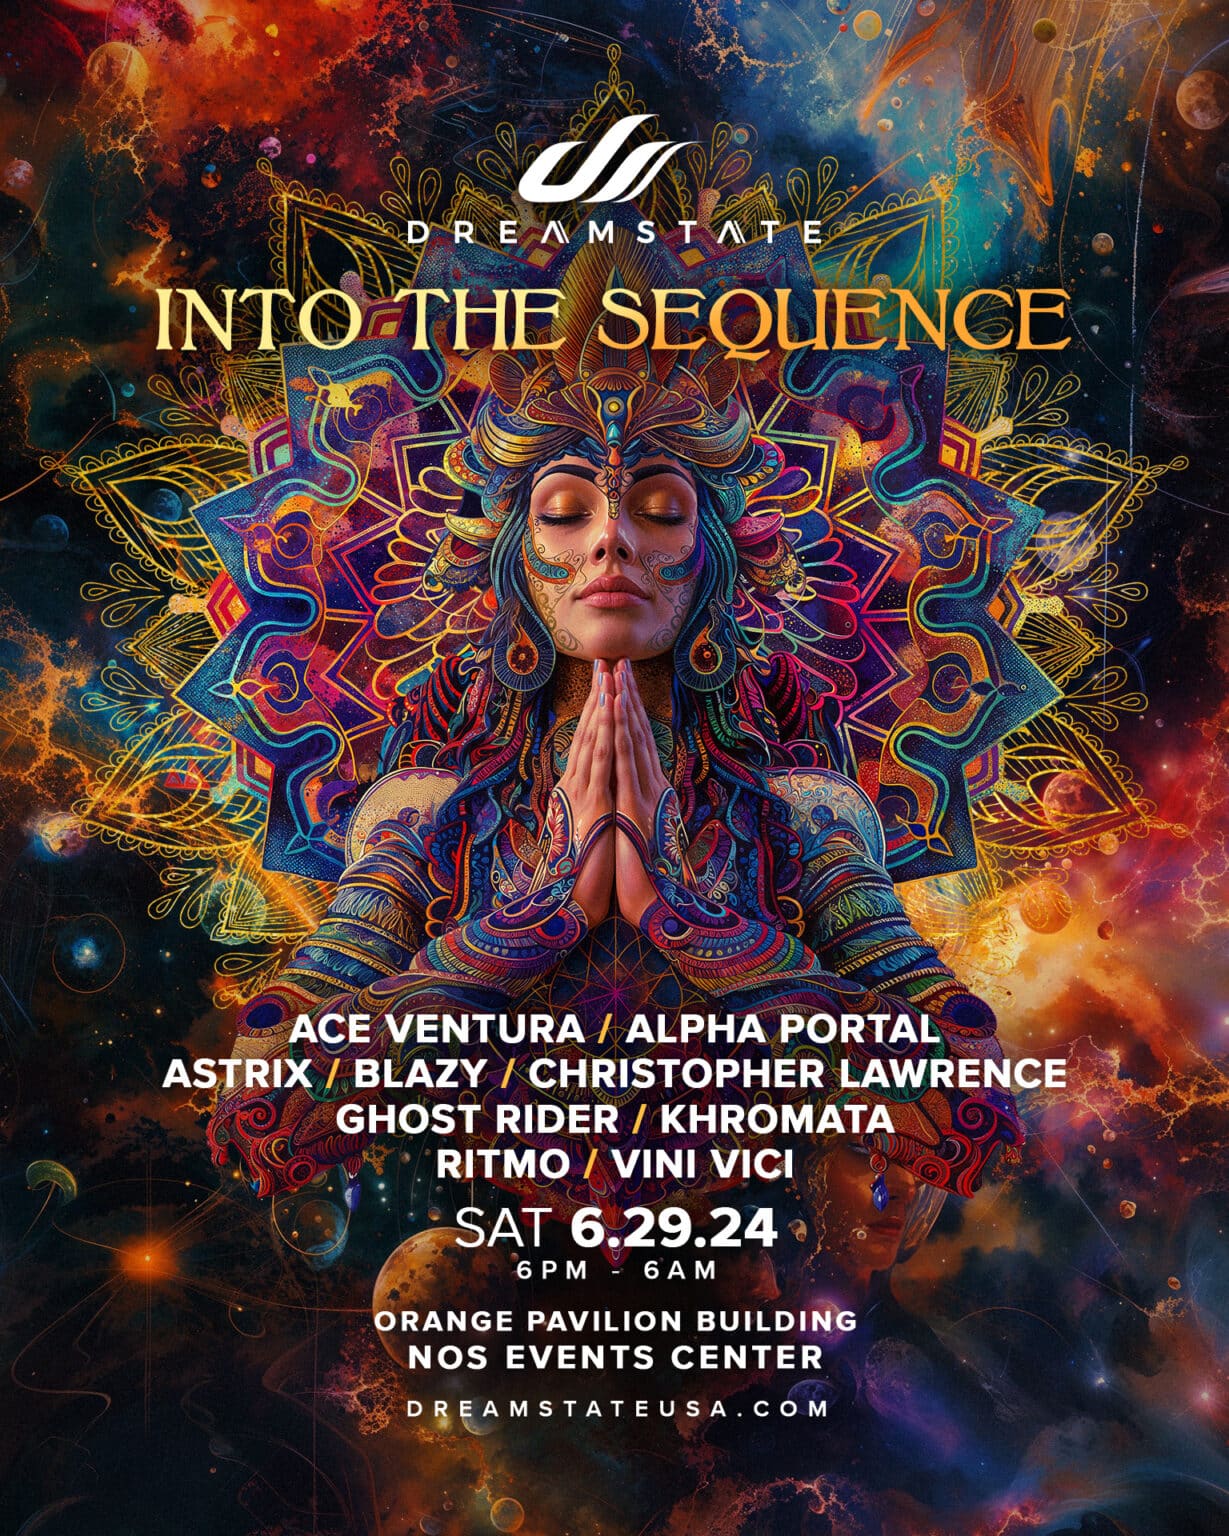 Into The Sequence: Insomniac’s Newest Psytrance Event